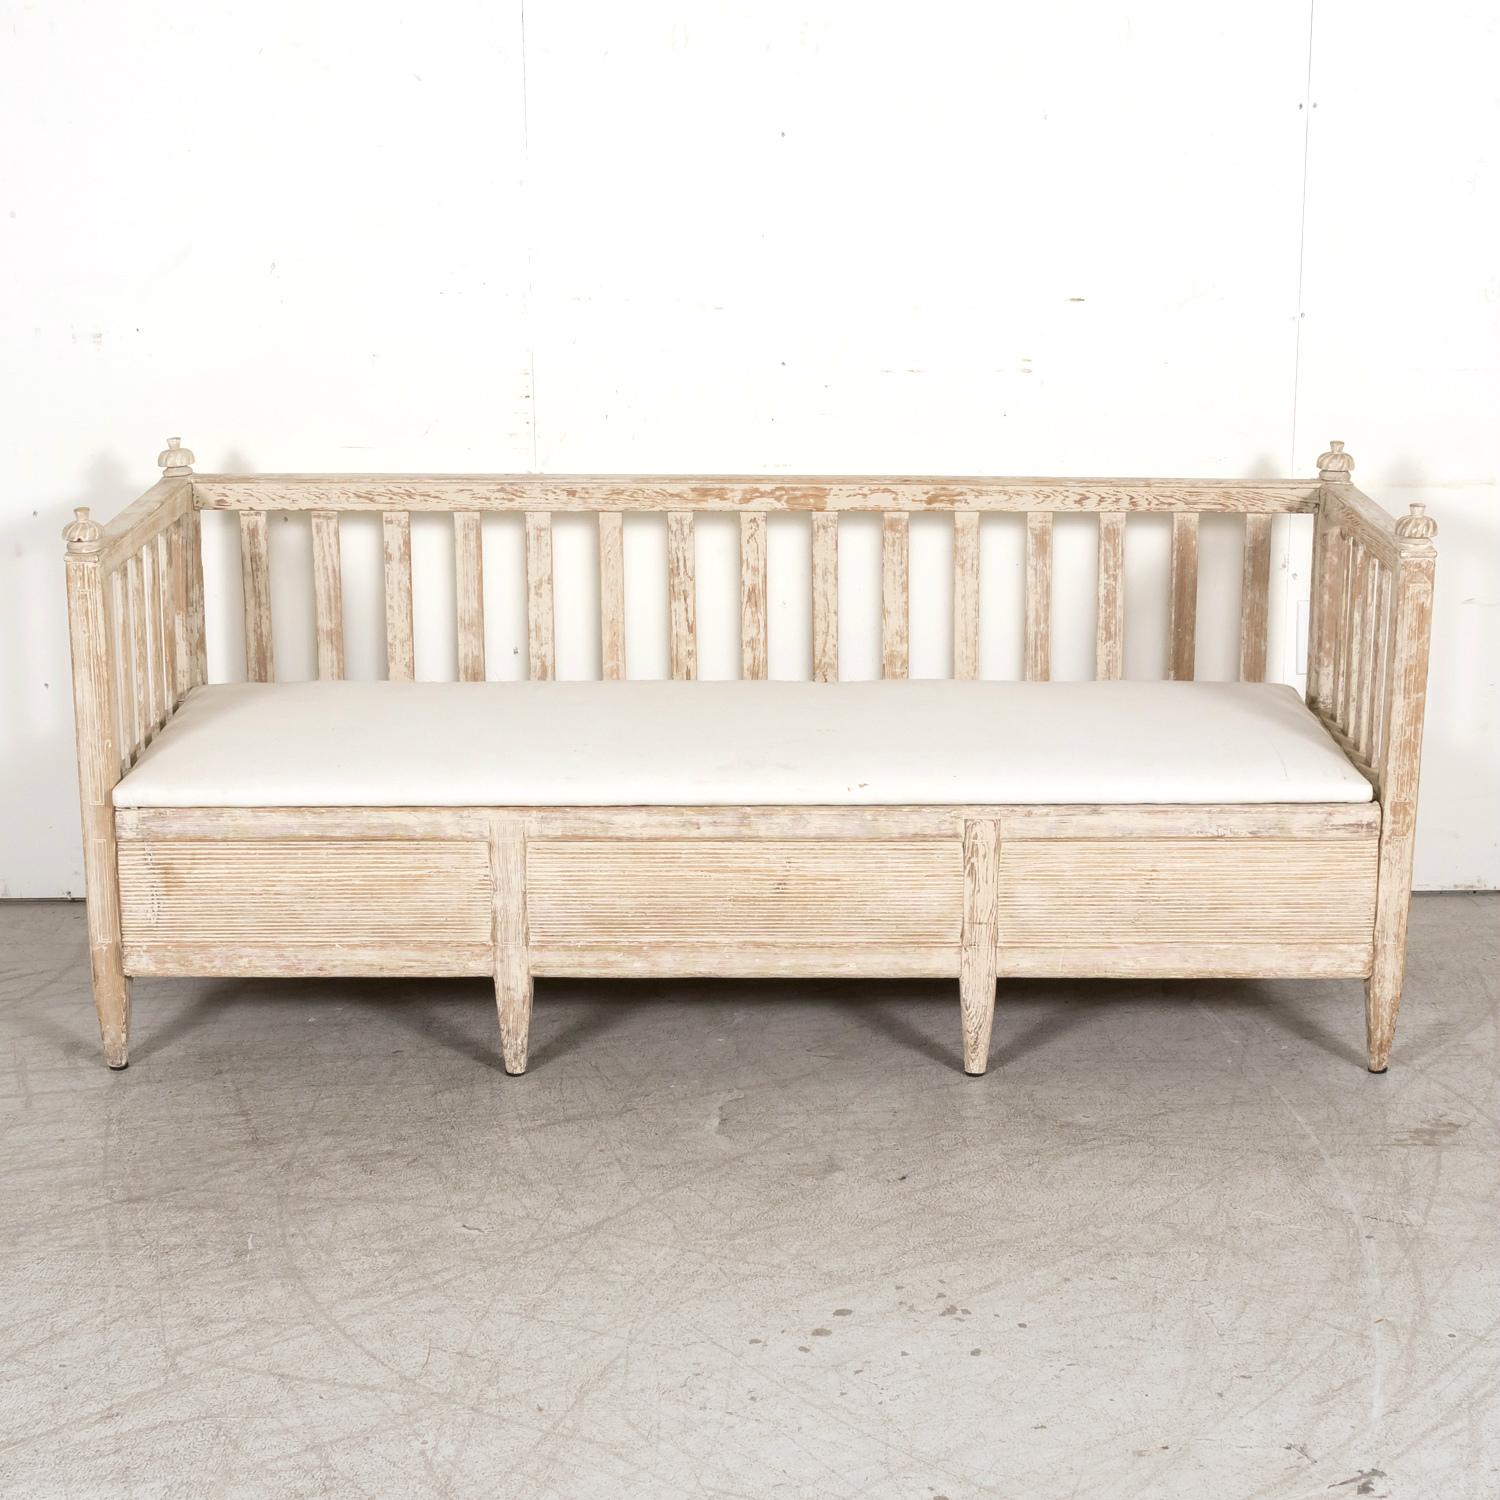 A mid-19th century Swedish Gustavian style painted wood stick back kitchen sofa or bench, circa 1850s. Scraped to the original off white paint, this antique sofa bench is typical of the Swedish desire for light and soft colors that helped bring